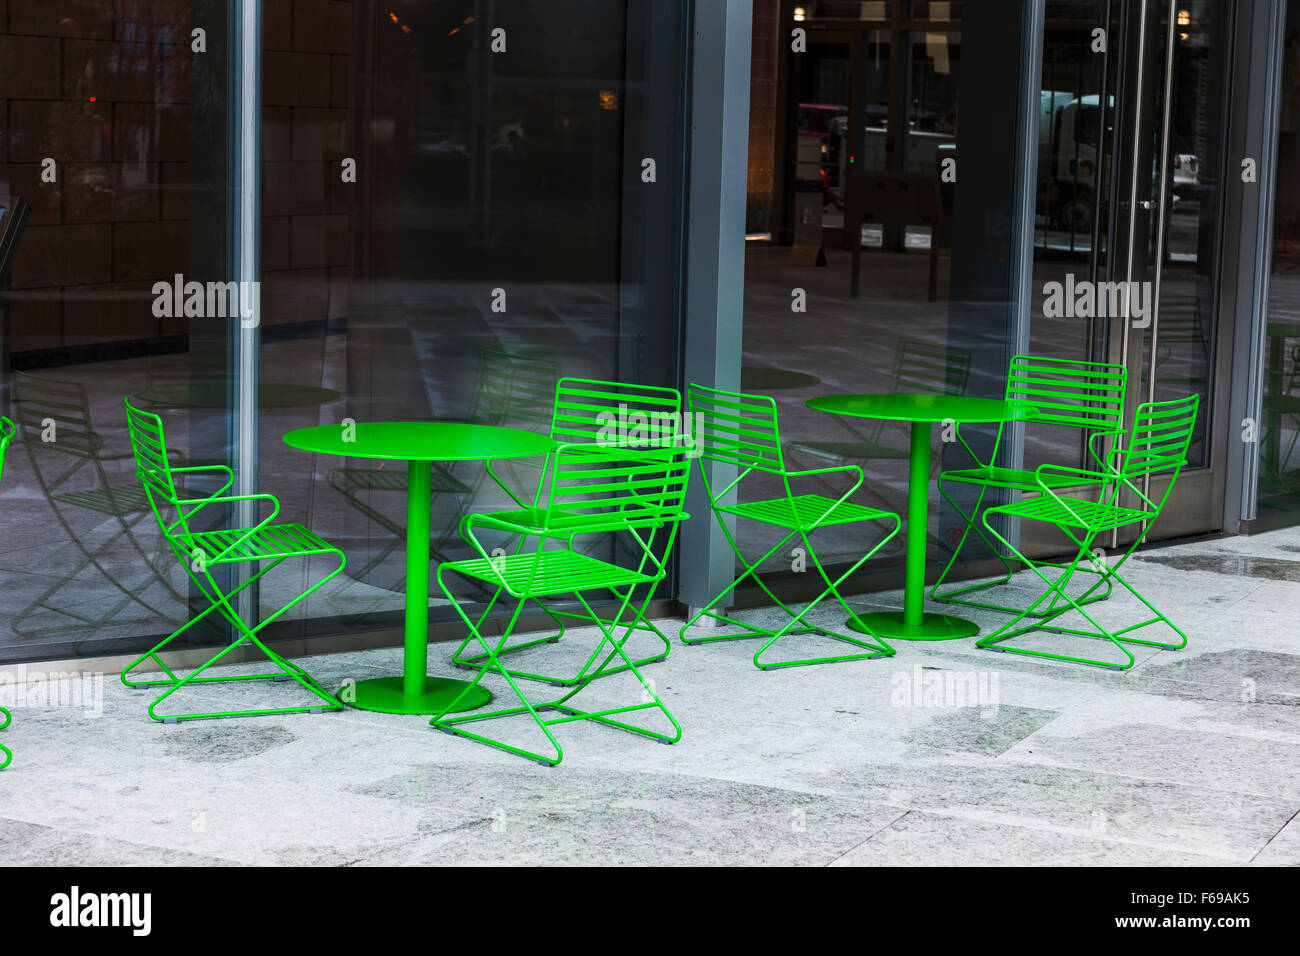 Green table and chairs outside downtown building Stock Photo